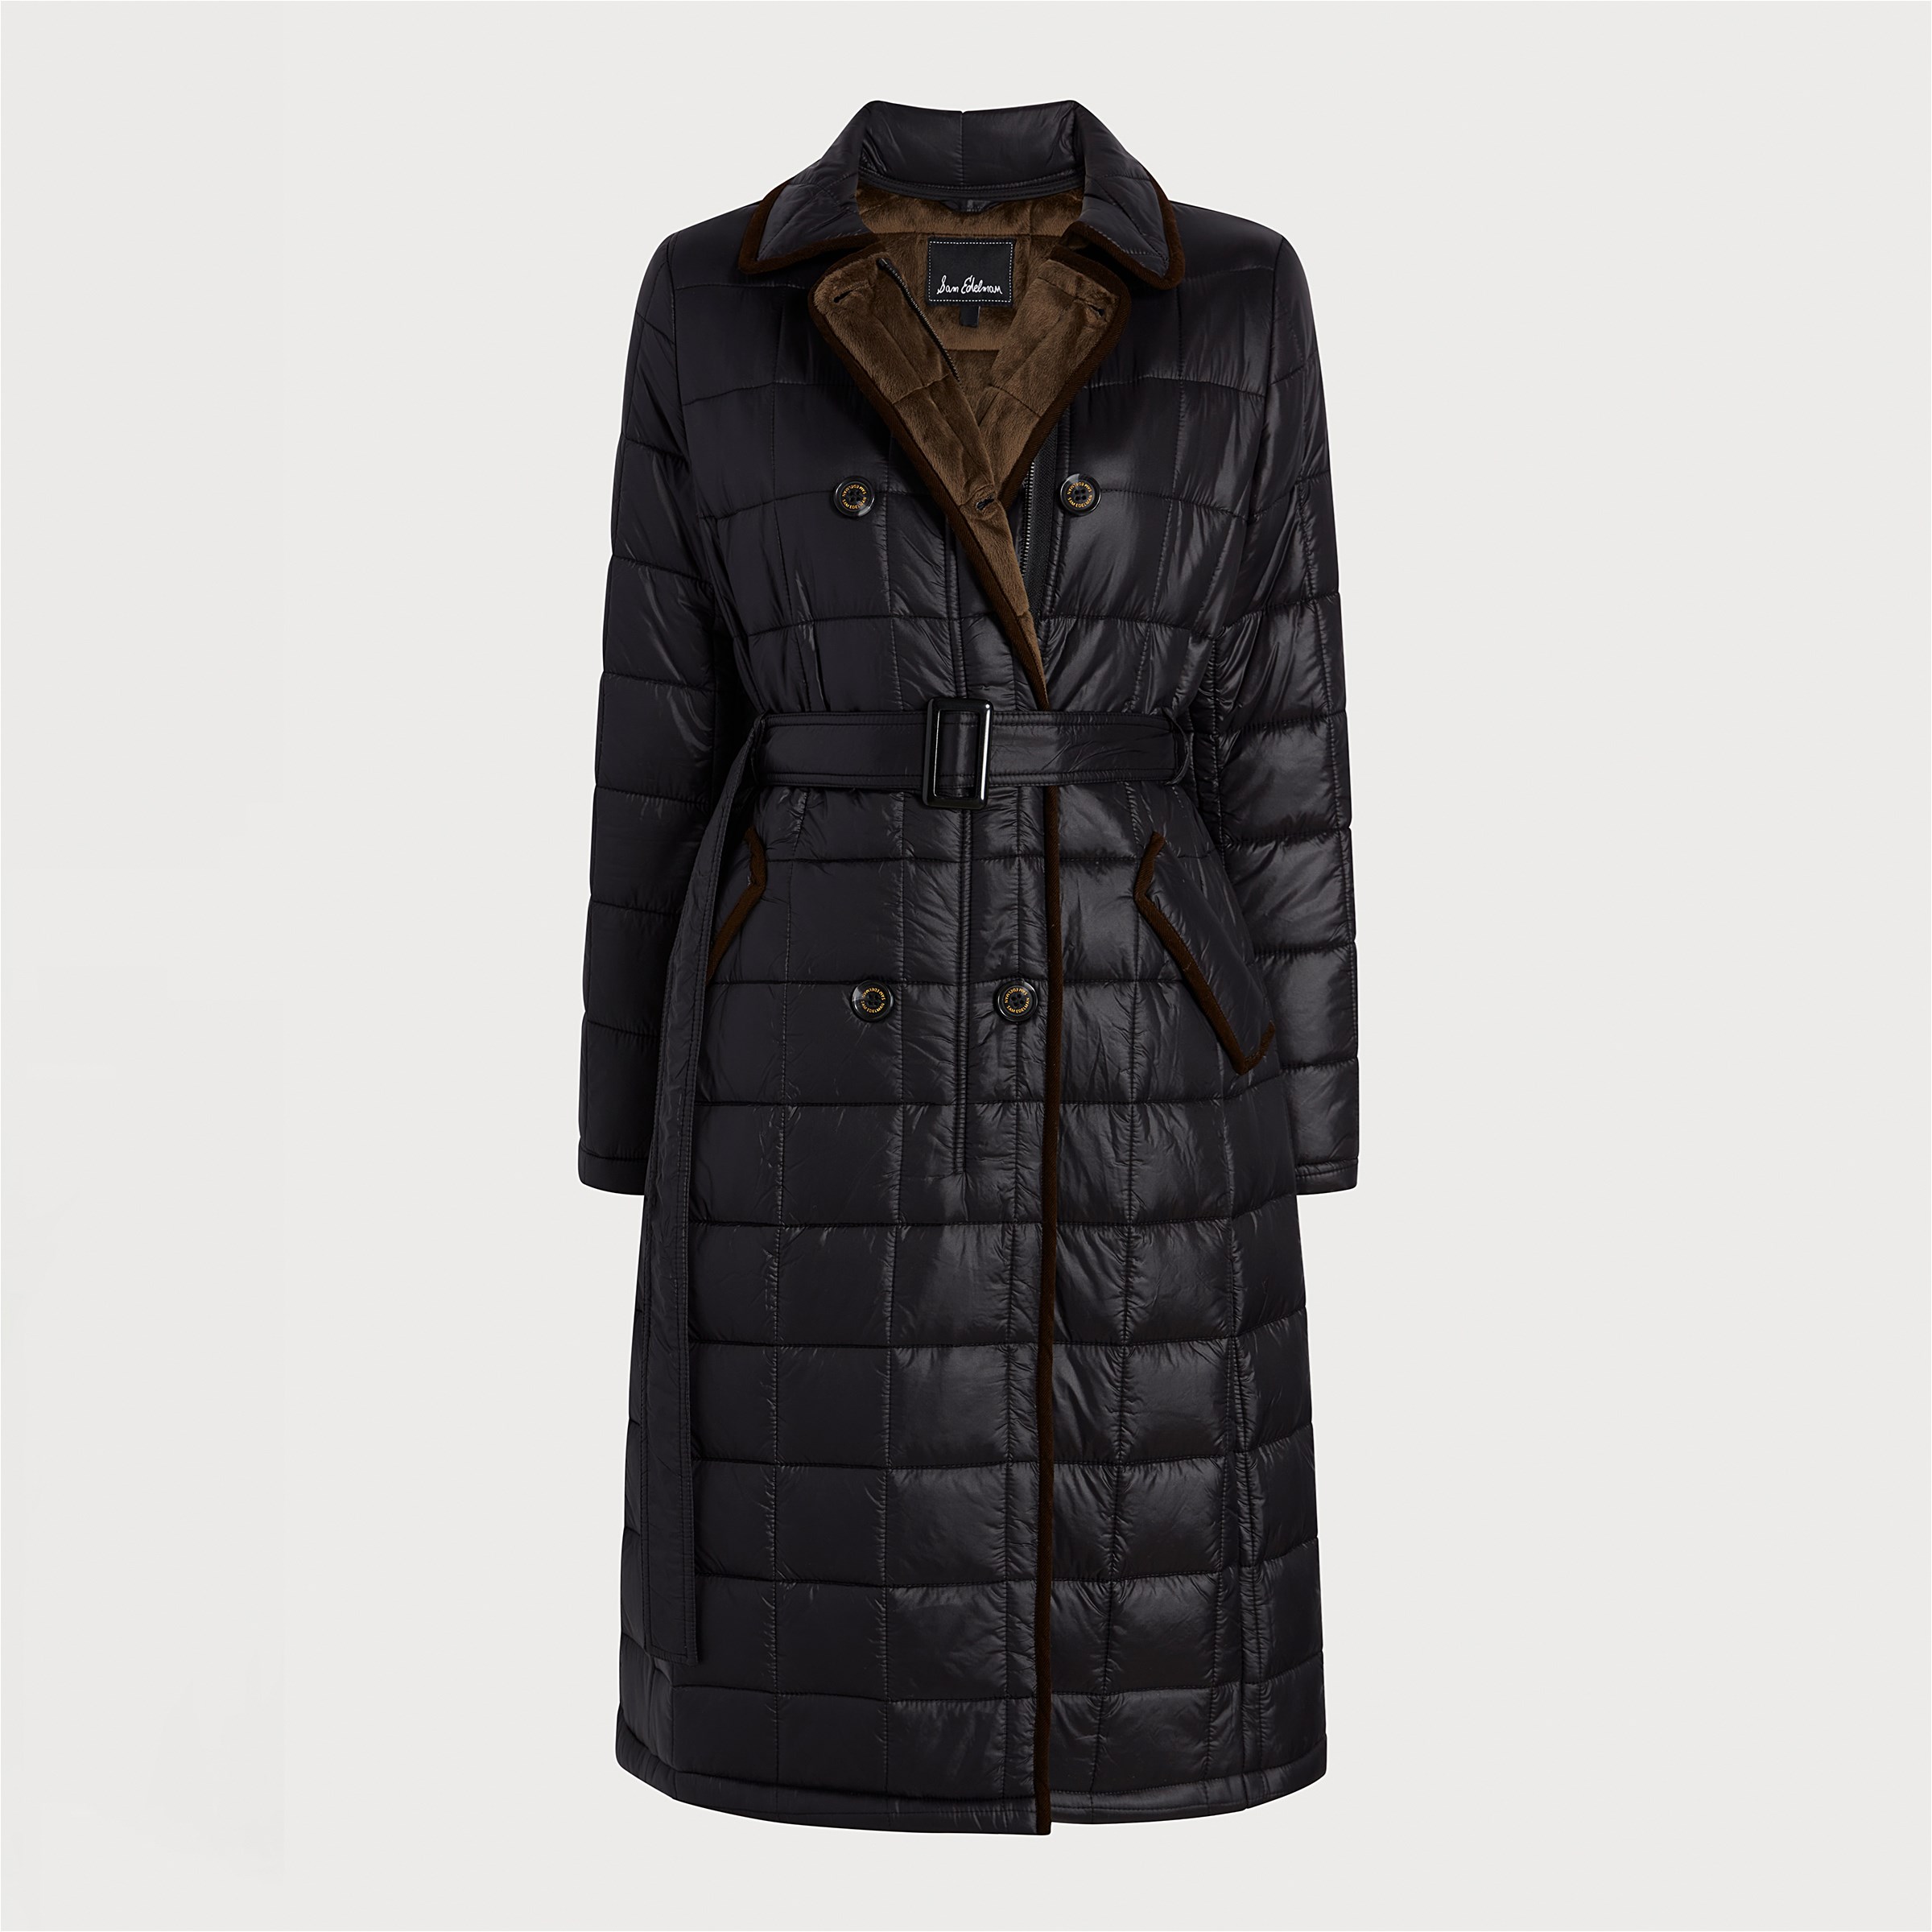 Sam Edelman Quilted Faux Fur Lined Trench Coat | Women's Coats